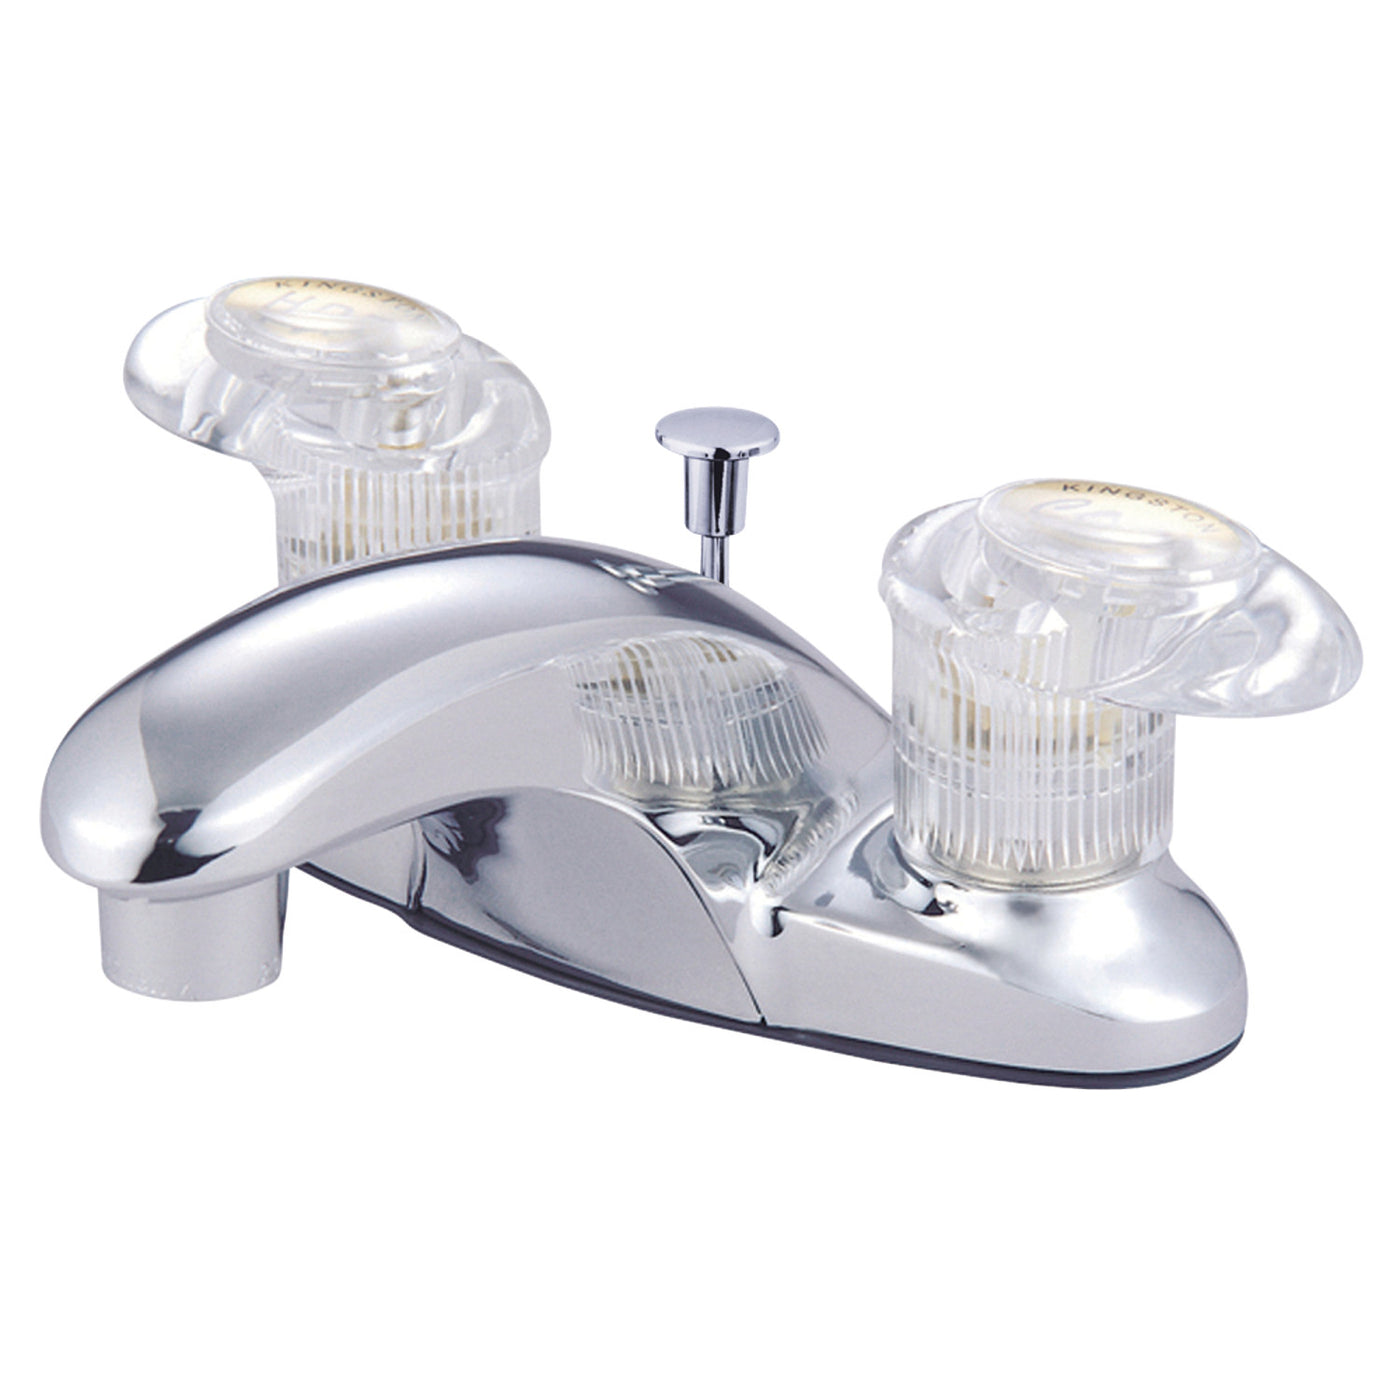 Elements of Design EB6151ALL 4-Inch Centerset Bathroom Faucet, Polished Chrome